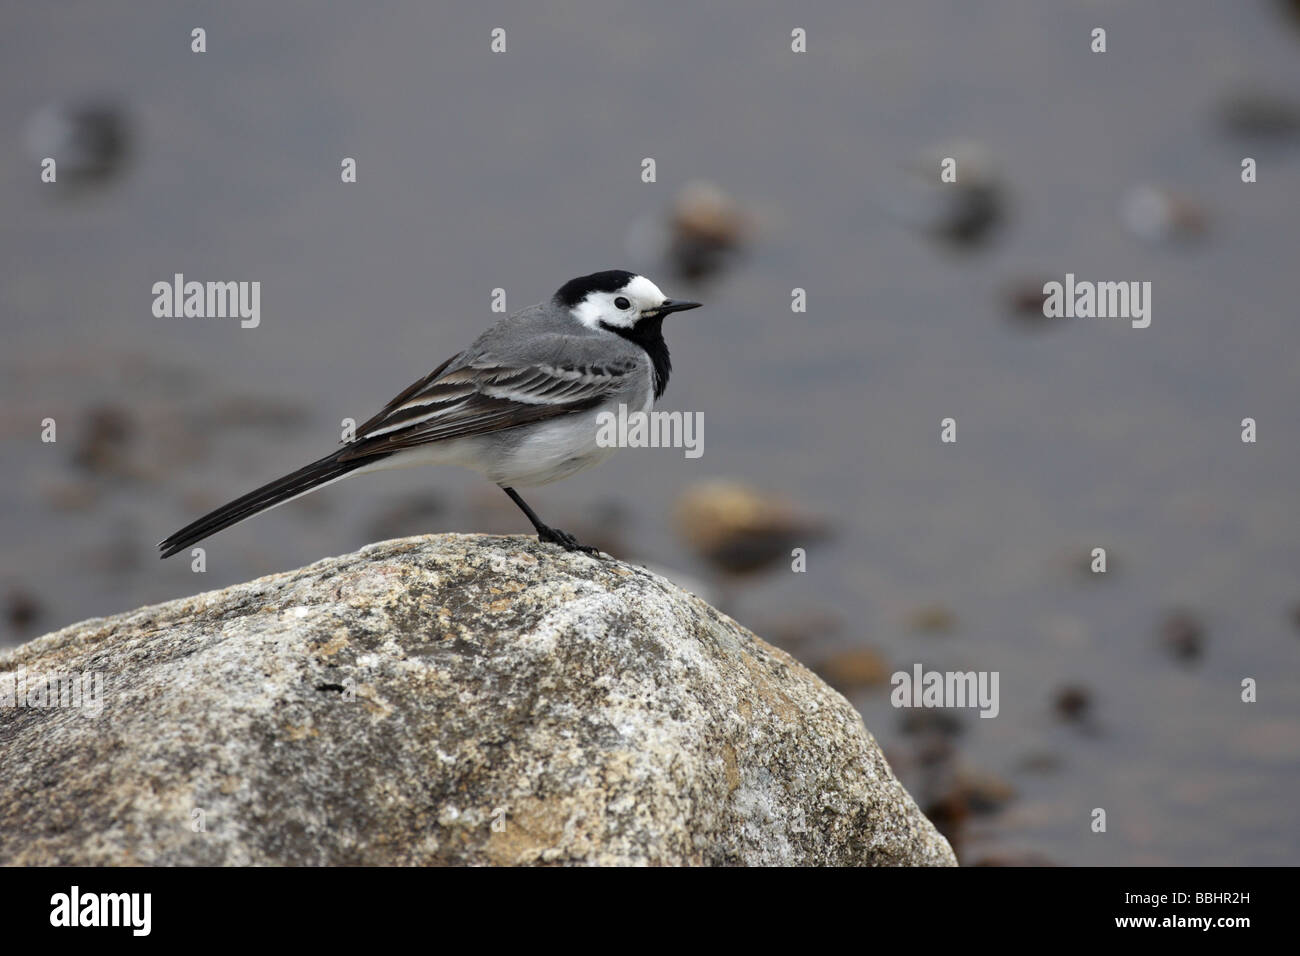 Pied Wagtail Motacilla alba yarrellii sitting on a rock by the side of a loch in profile Stock Photo